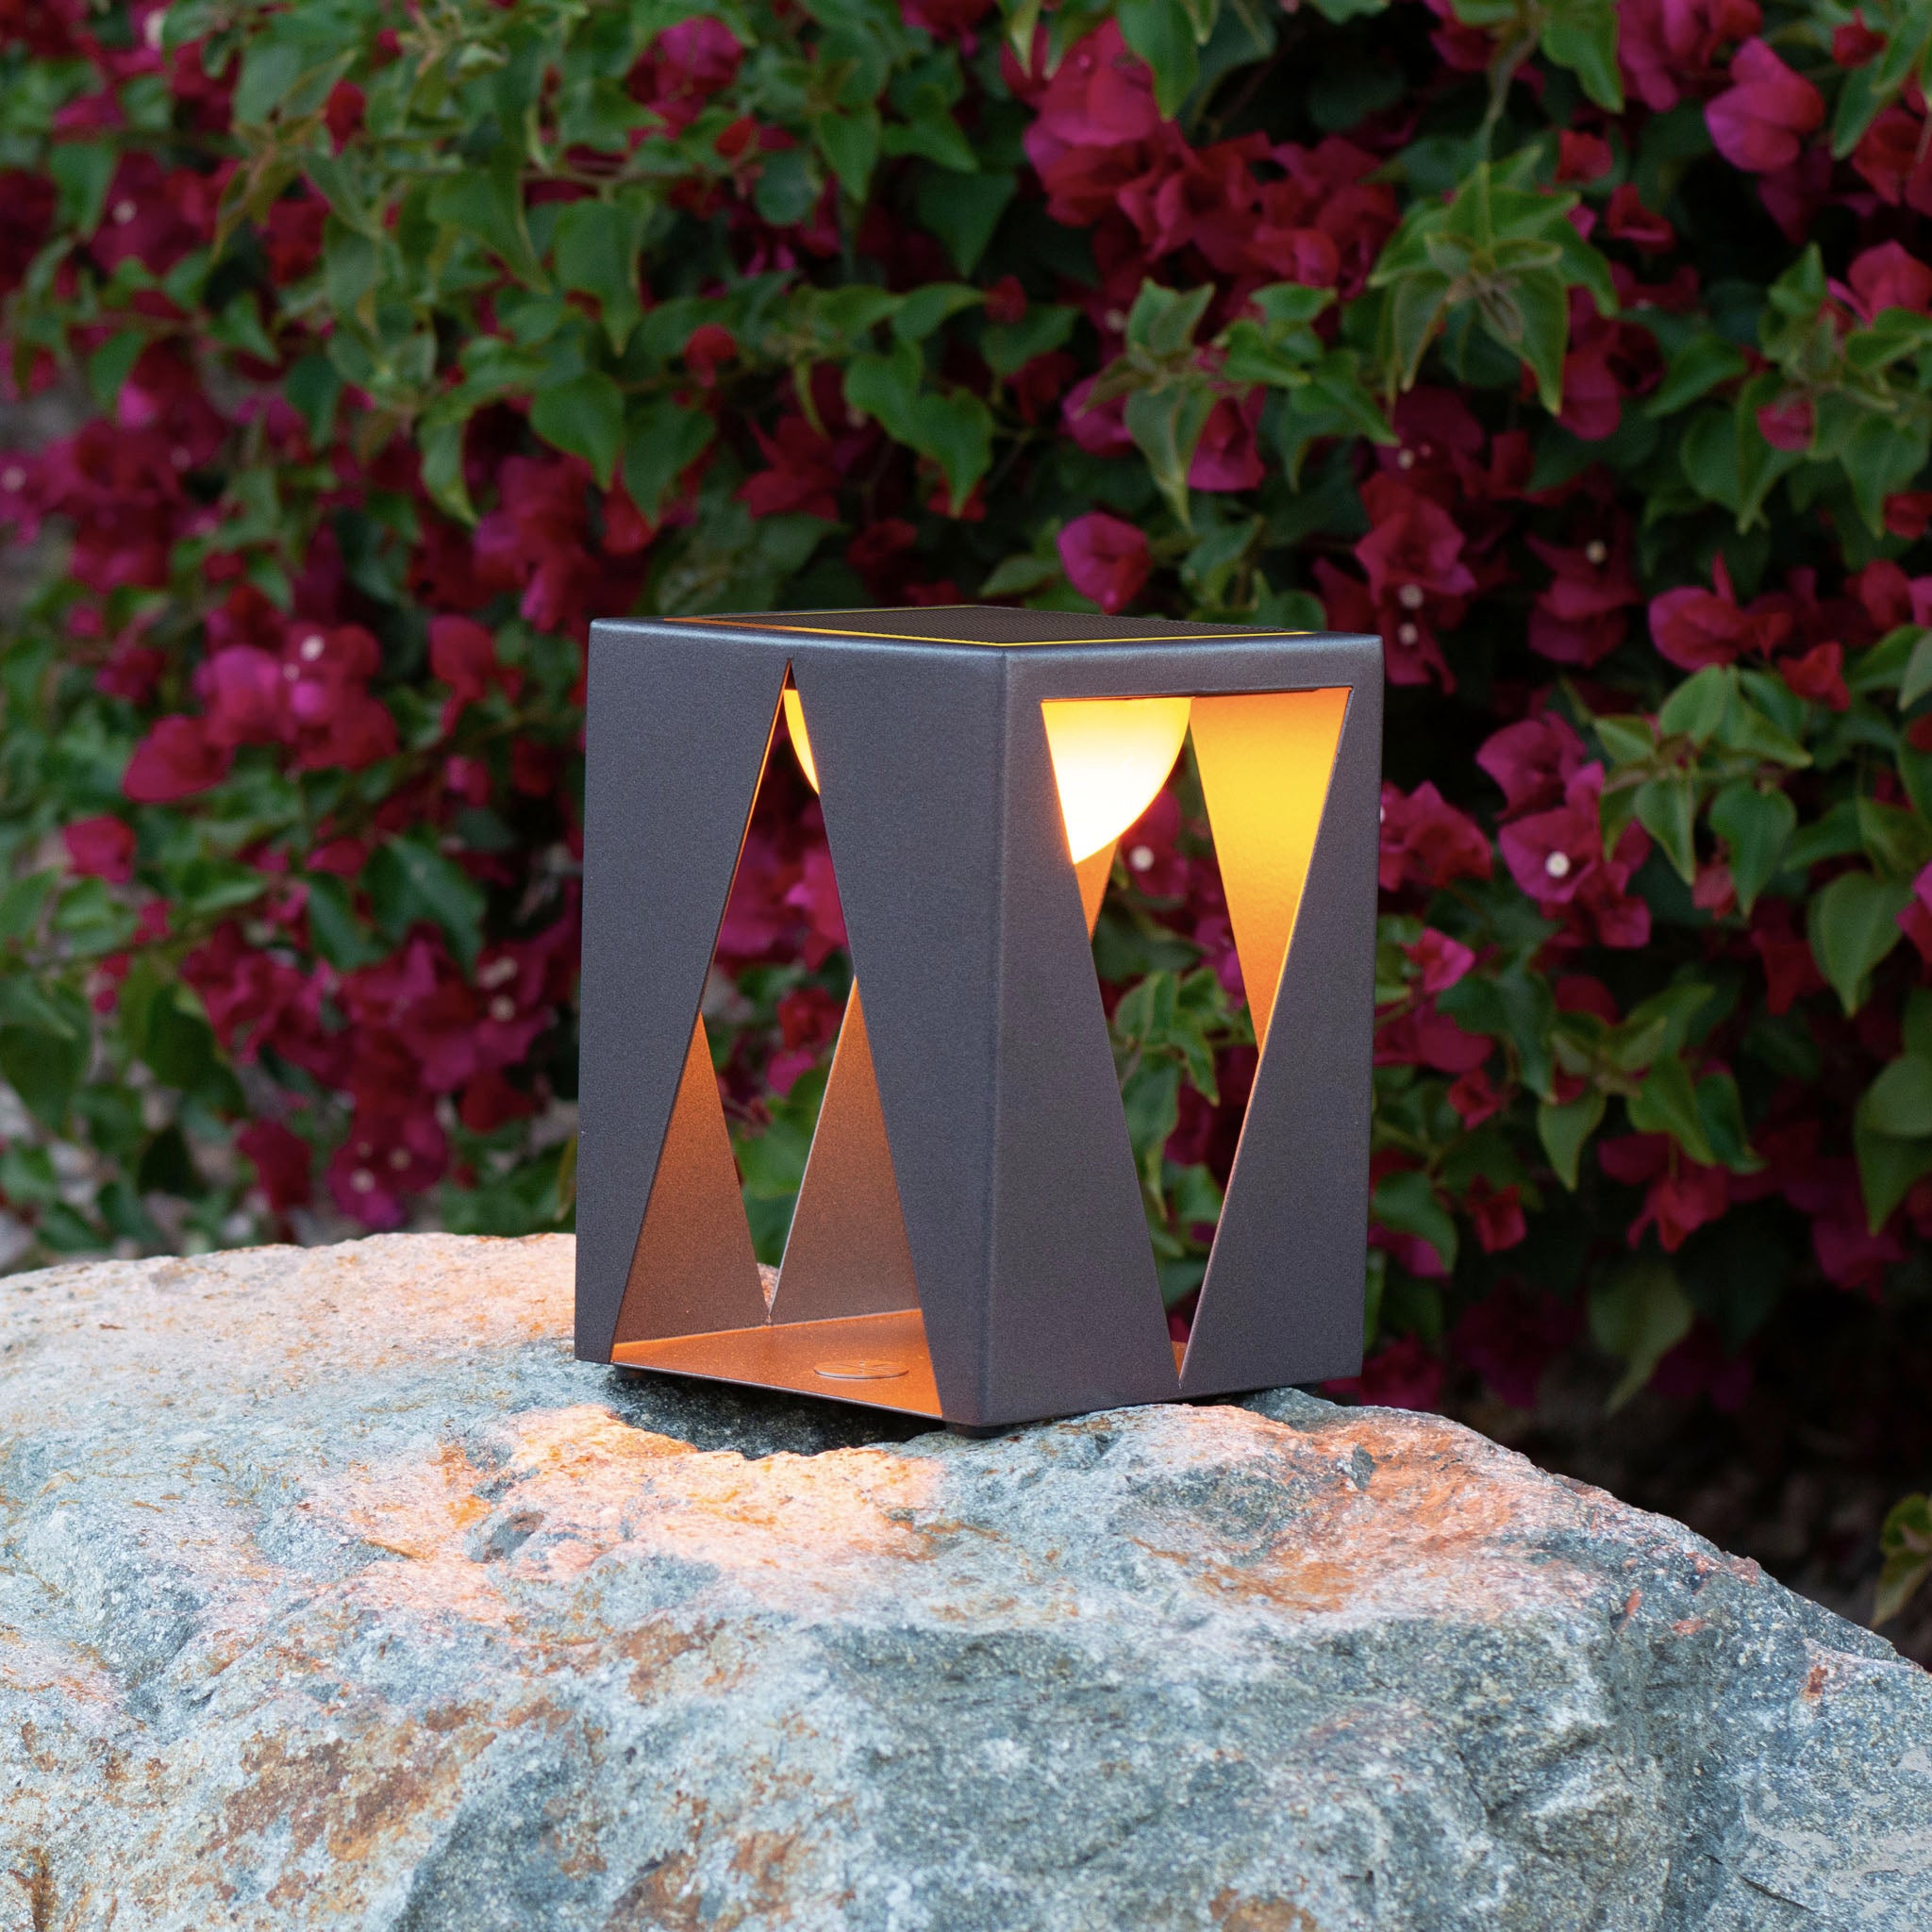 Teatree table light with ykary bulb on a rock outdoor